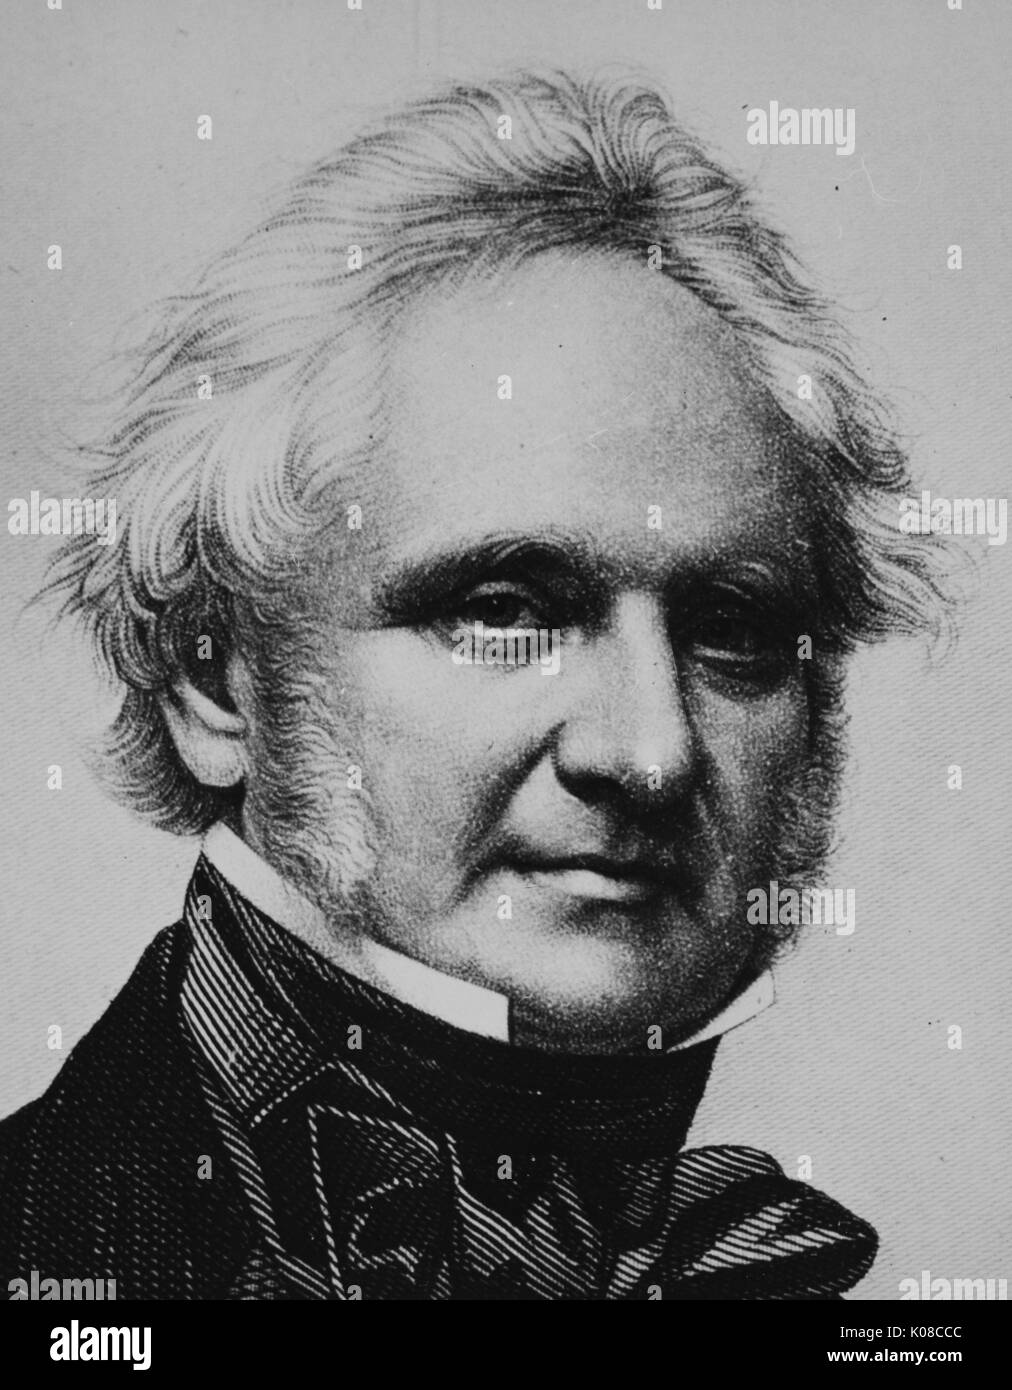 Headshot of George Peabody, an American-British financier and philanthropist who founded the Peabody Institute, devoted to music and arts education and performance, and George Peabody Library in Baltimore, Maryland, United States, 1840. Stock Photo